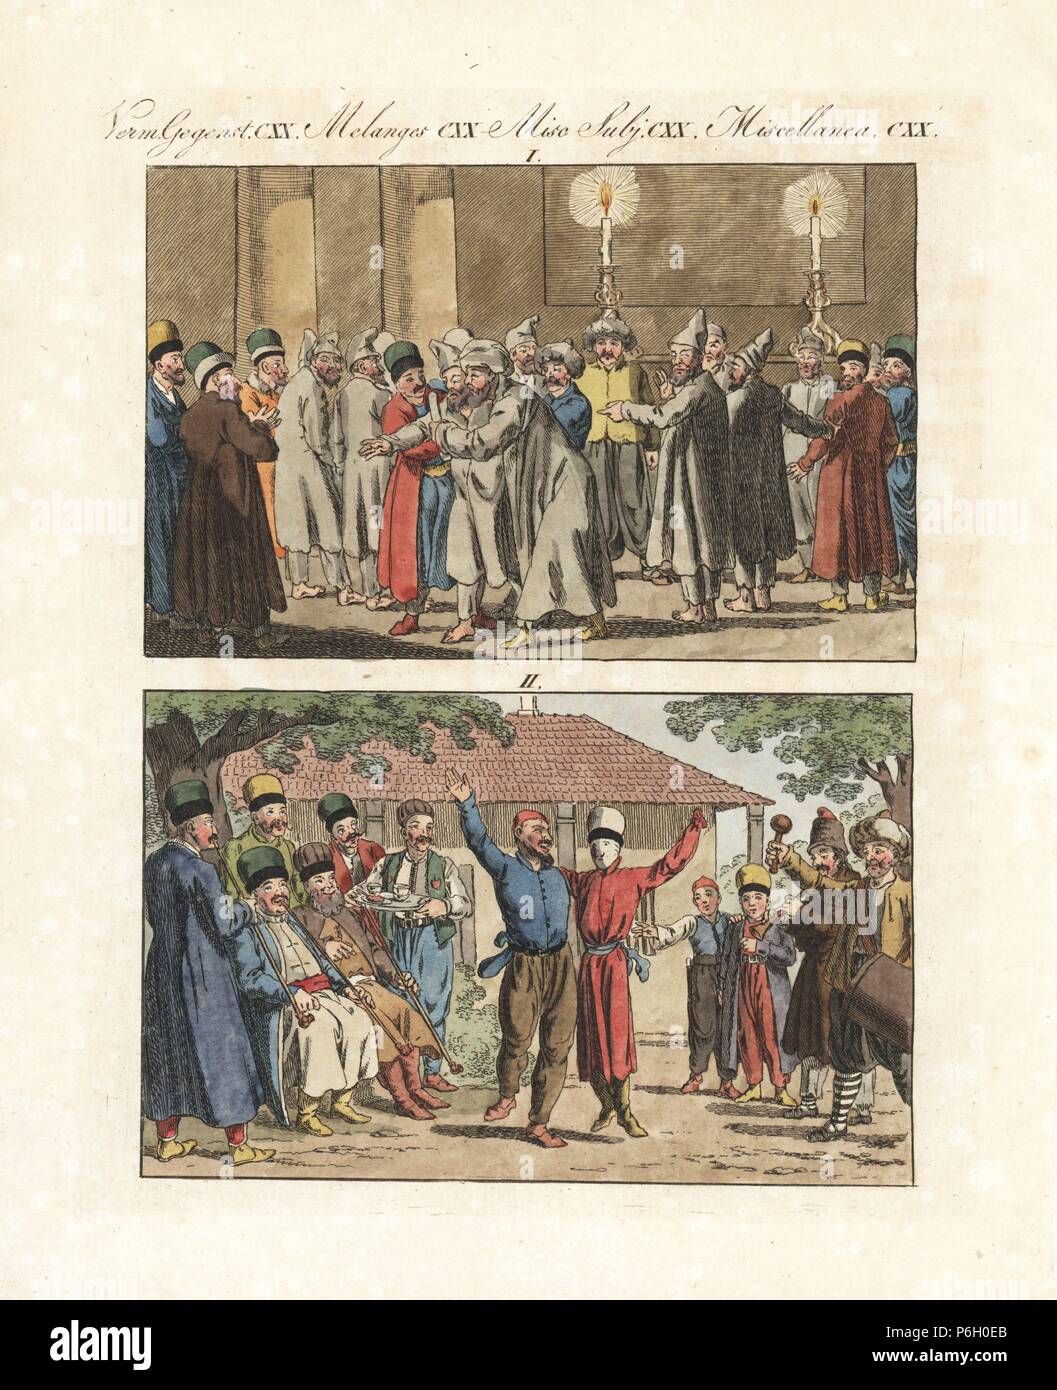 Scenes from the Crimea: Dance of the Dervishes in Bakshi-Saraj mosque in old Taurida 1, and a Jewish batteleur (juggler, street performer) from Constantinople dancing with a puppet to music from drums and pipes in the Crimea 2, 18th century. Handcoloured copperplate engraving from Bertuch's 'Bilderbuch fur Kinder' (Picture Book for Children), Weimar, 1807. Friedrich Johann Bertuch (1747-1822) was a German publisher and man of arts most famous for his 12-volume encyclopedia for children illustrated with 1,200 engraved plates on natural history, science, costume, mythology, etc., published from  Stock Photo